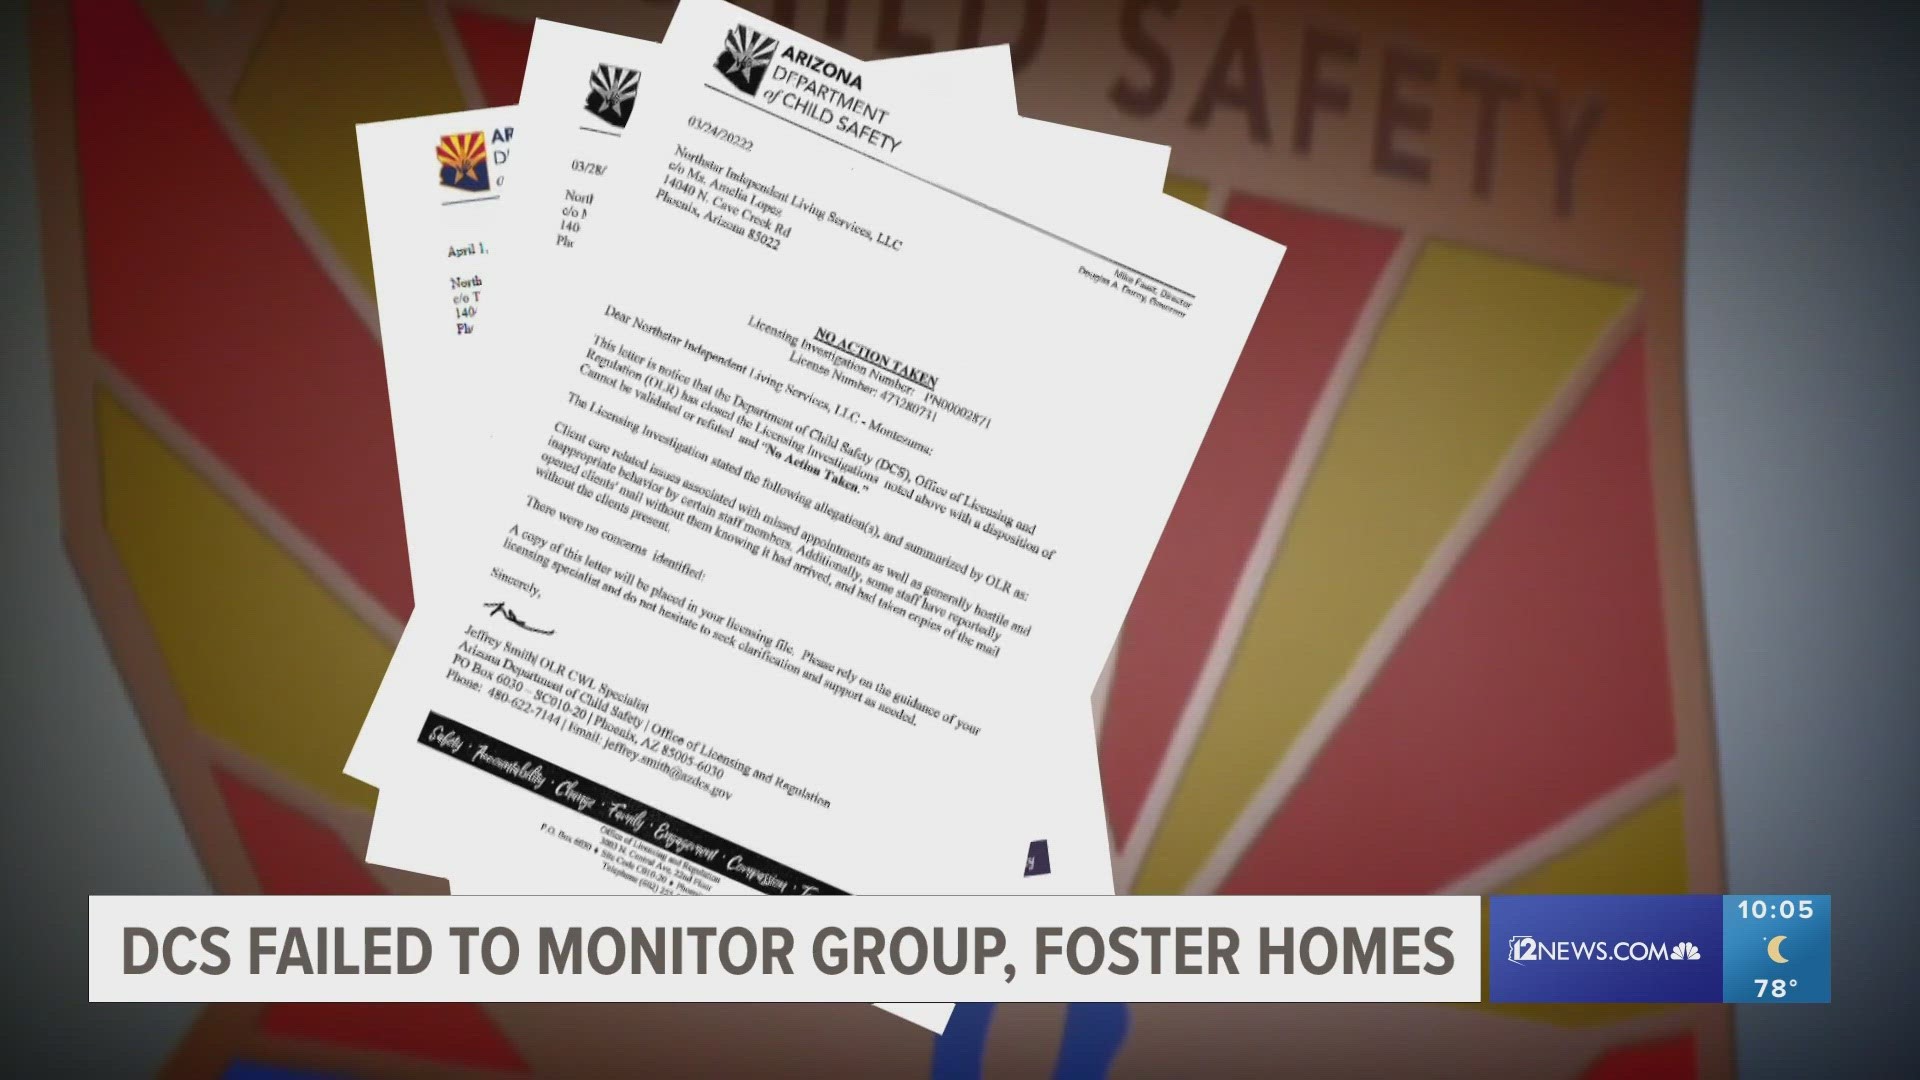 The report looked at how the Arizona department of Child Services investigated, resolved and monitored group homes and foster homes, after receiving complaints.